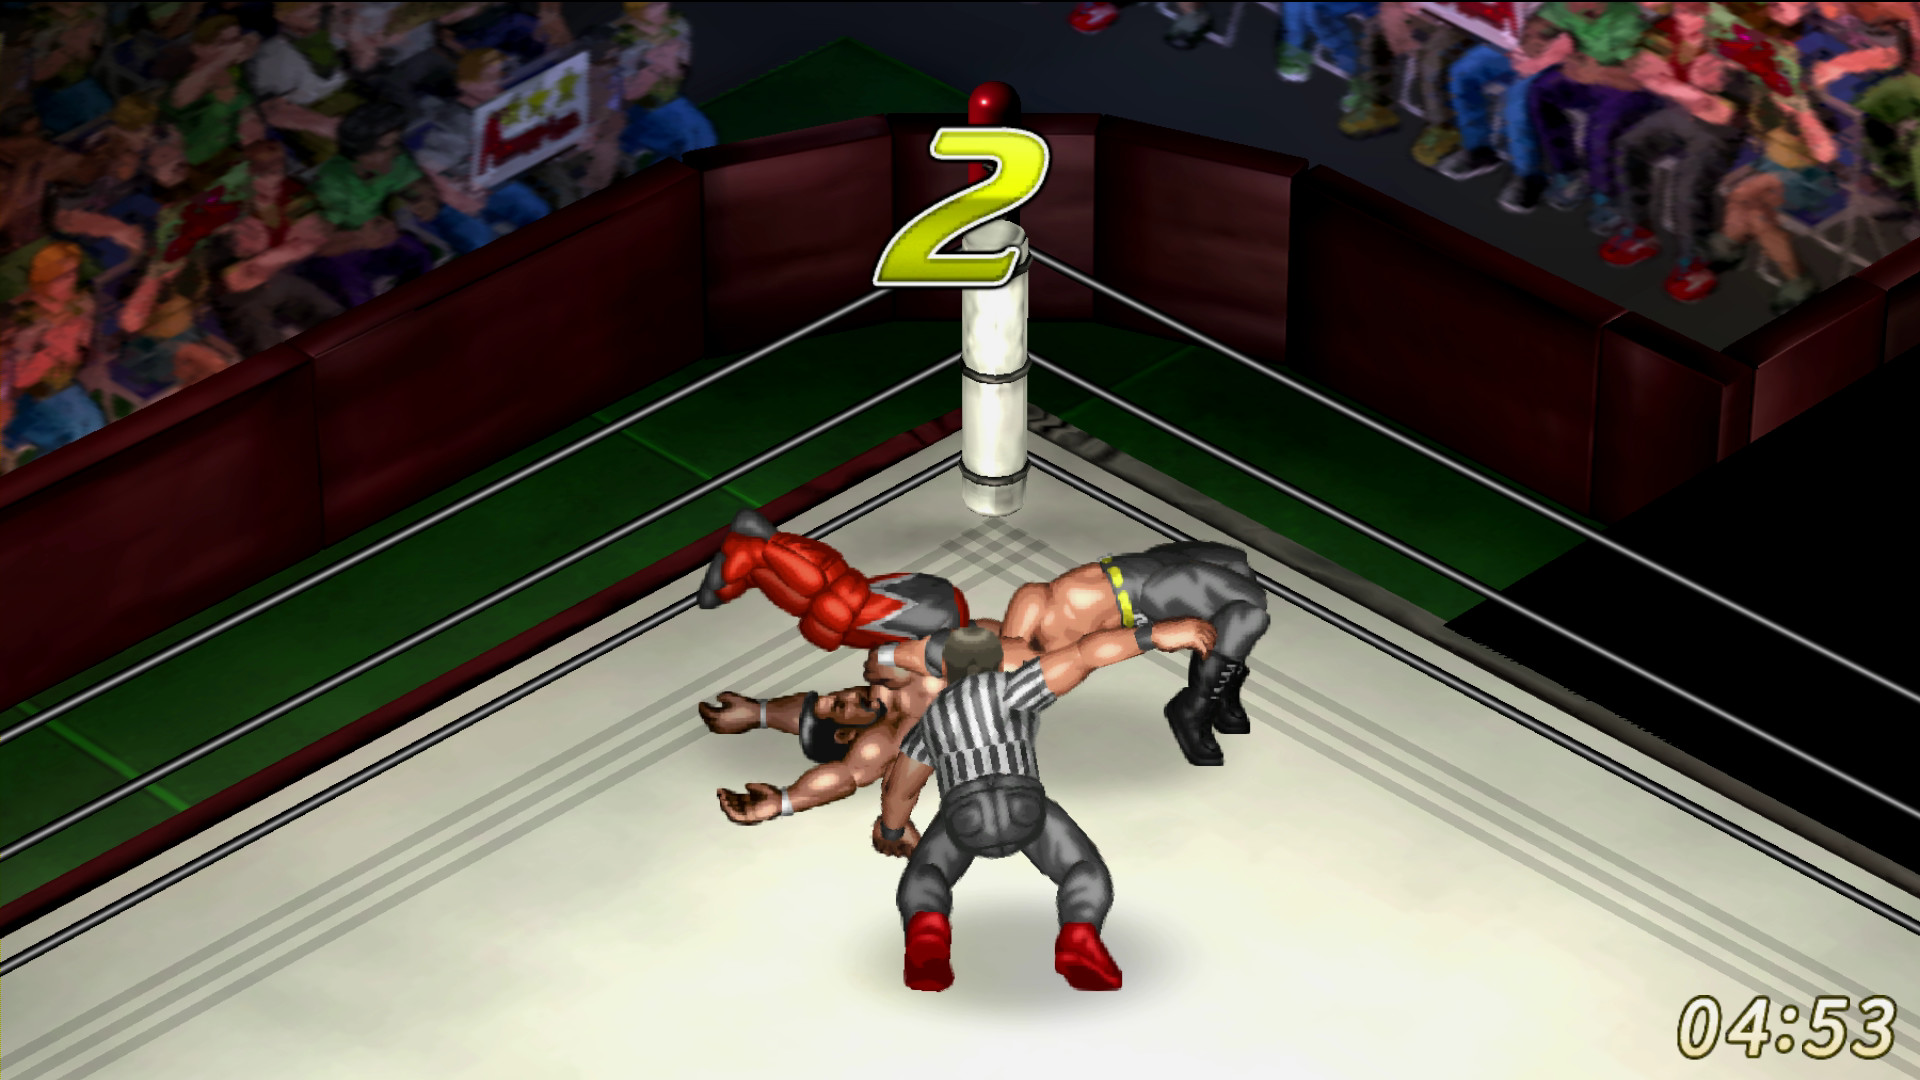 Lucha Libre Aaa Heroes Del Ring Psp Iso truehfiles